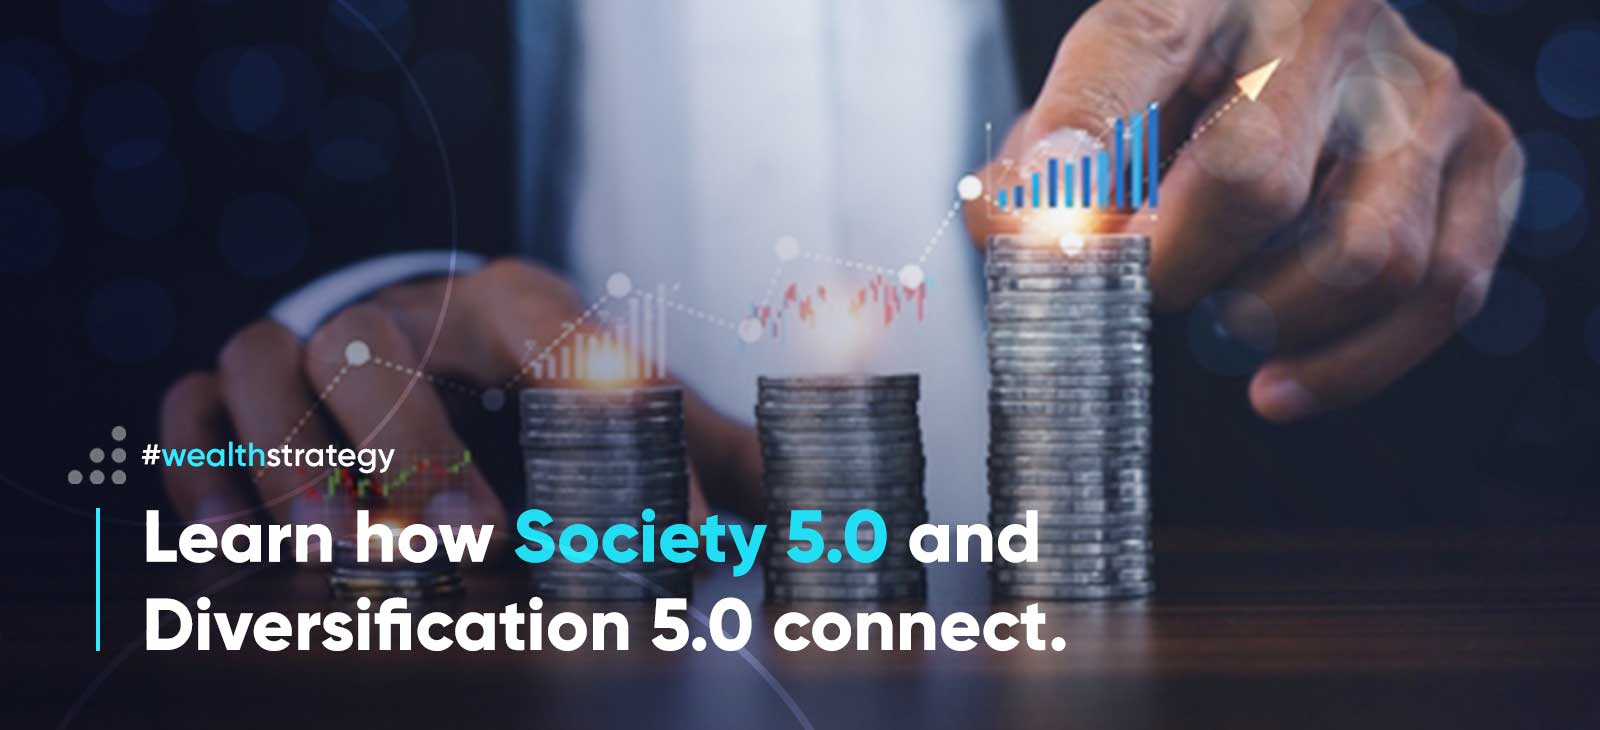 Learn how Society 5.0. and Diversification 5.0 connect